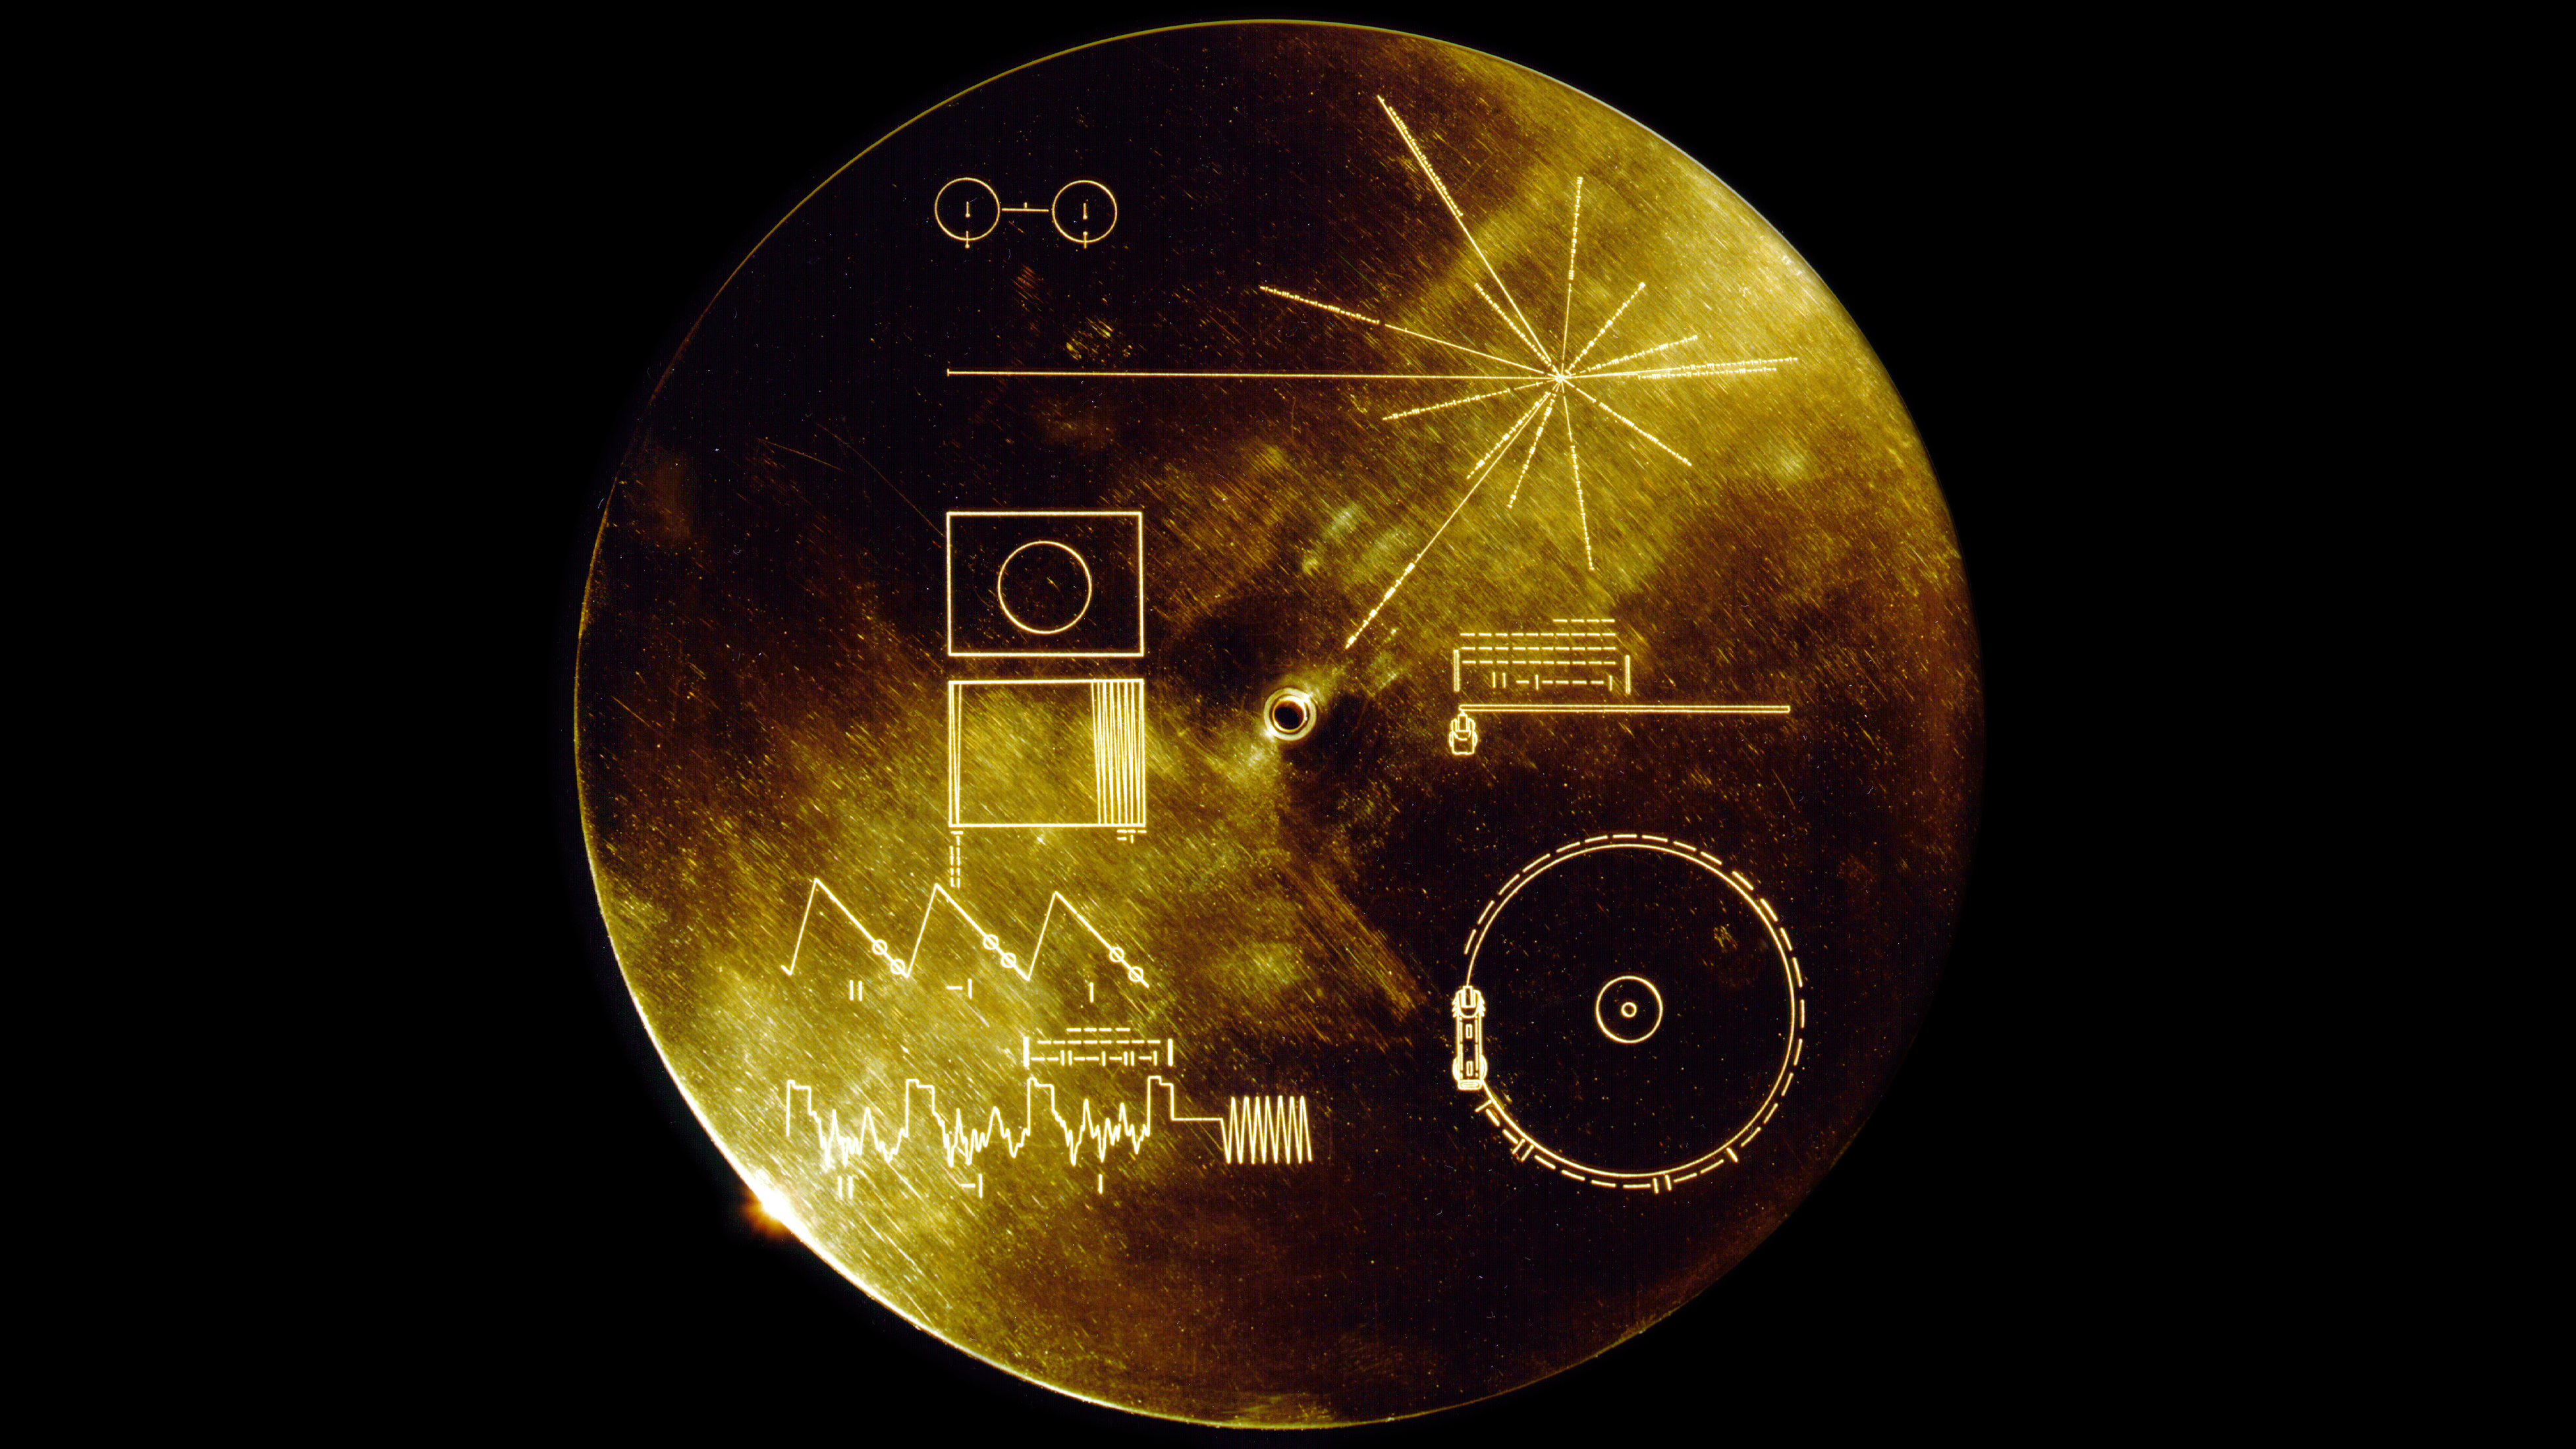 Discs Gold Gold Space Space Voyager Golden Record 3911x2200